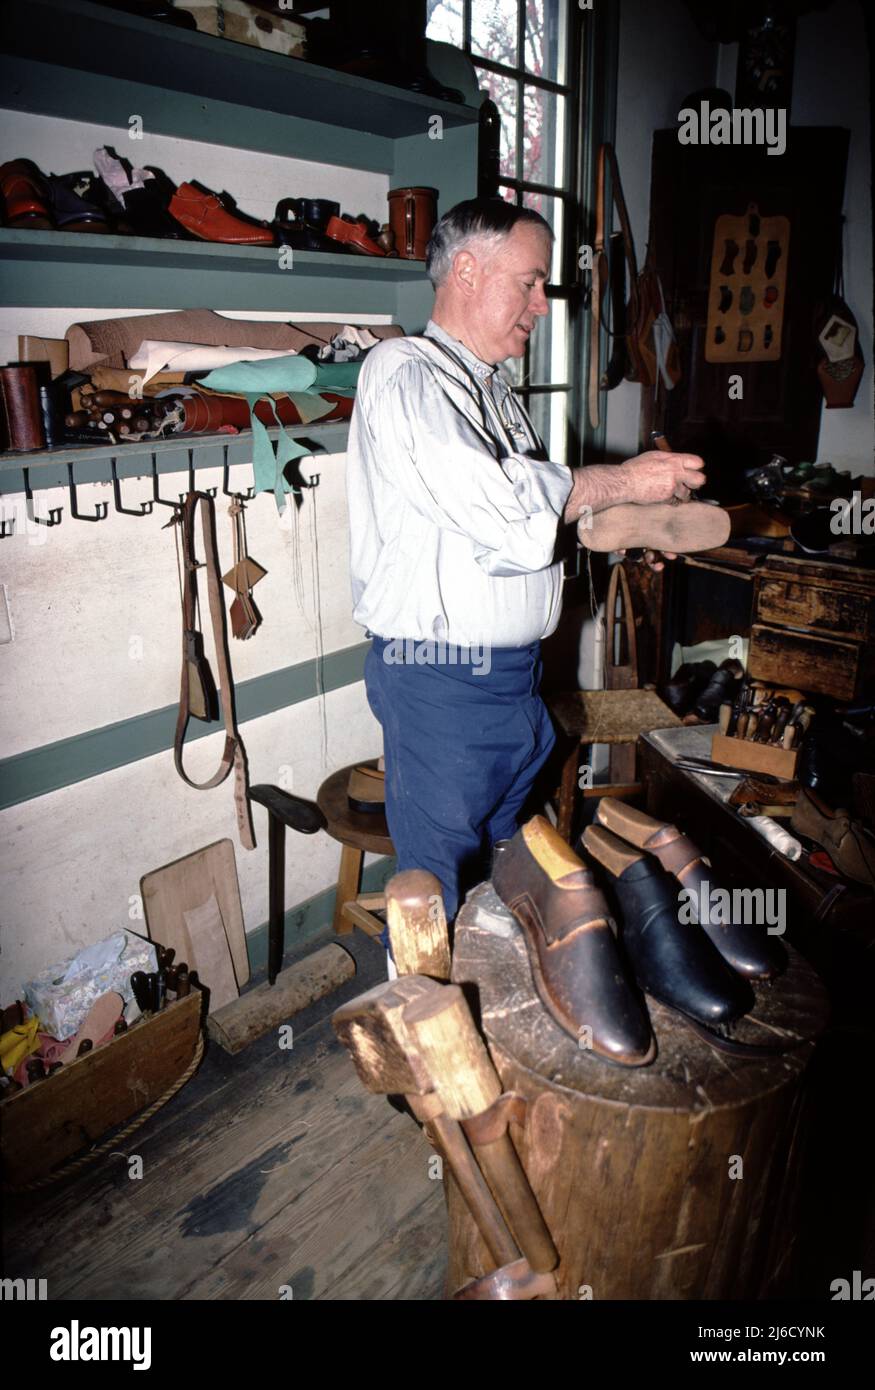 Williamsburg, CA. U.S.A. 9/1987. Cordwainer was the title given to  shoemakers. Cobblers were those who repaired shoes. The cobbler had as much  as five years less training than a cordwainer. In most